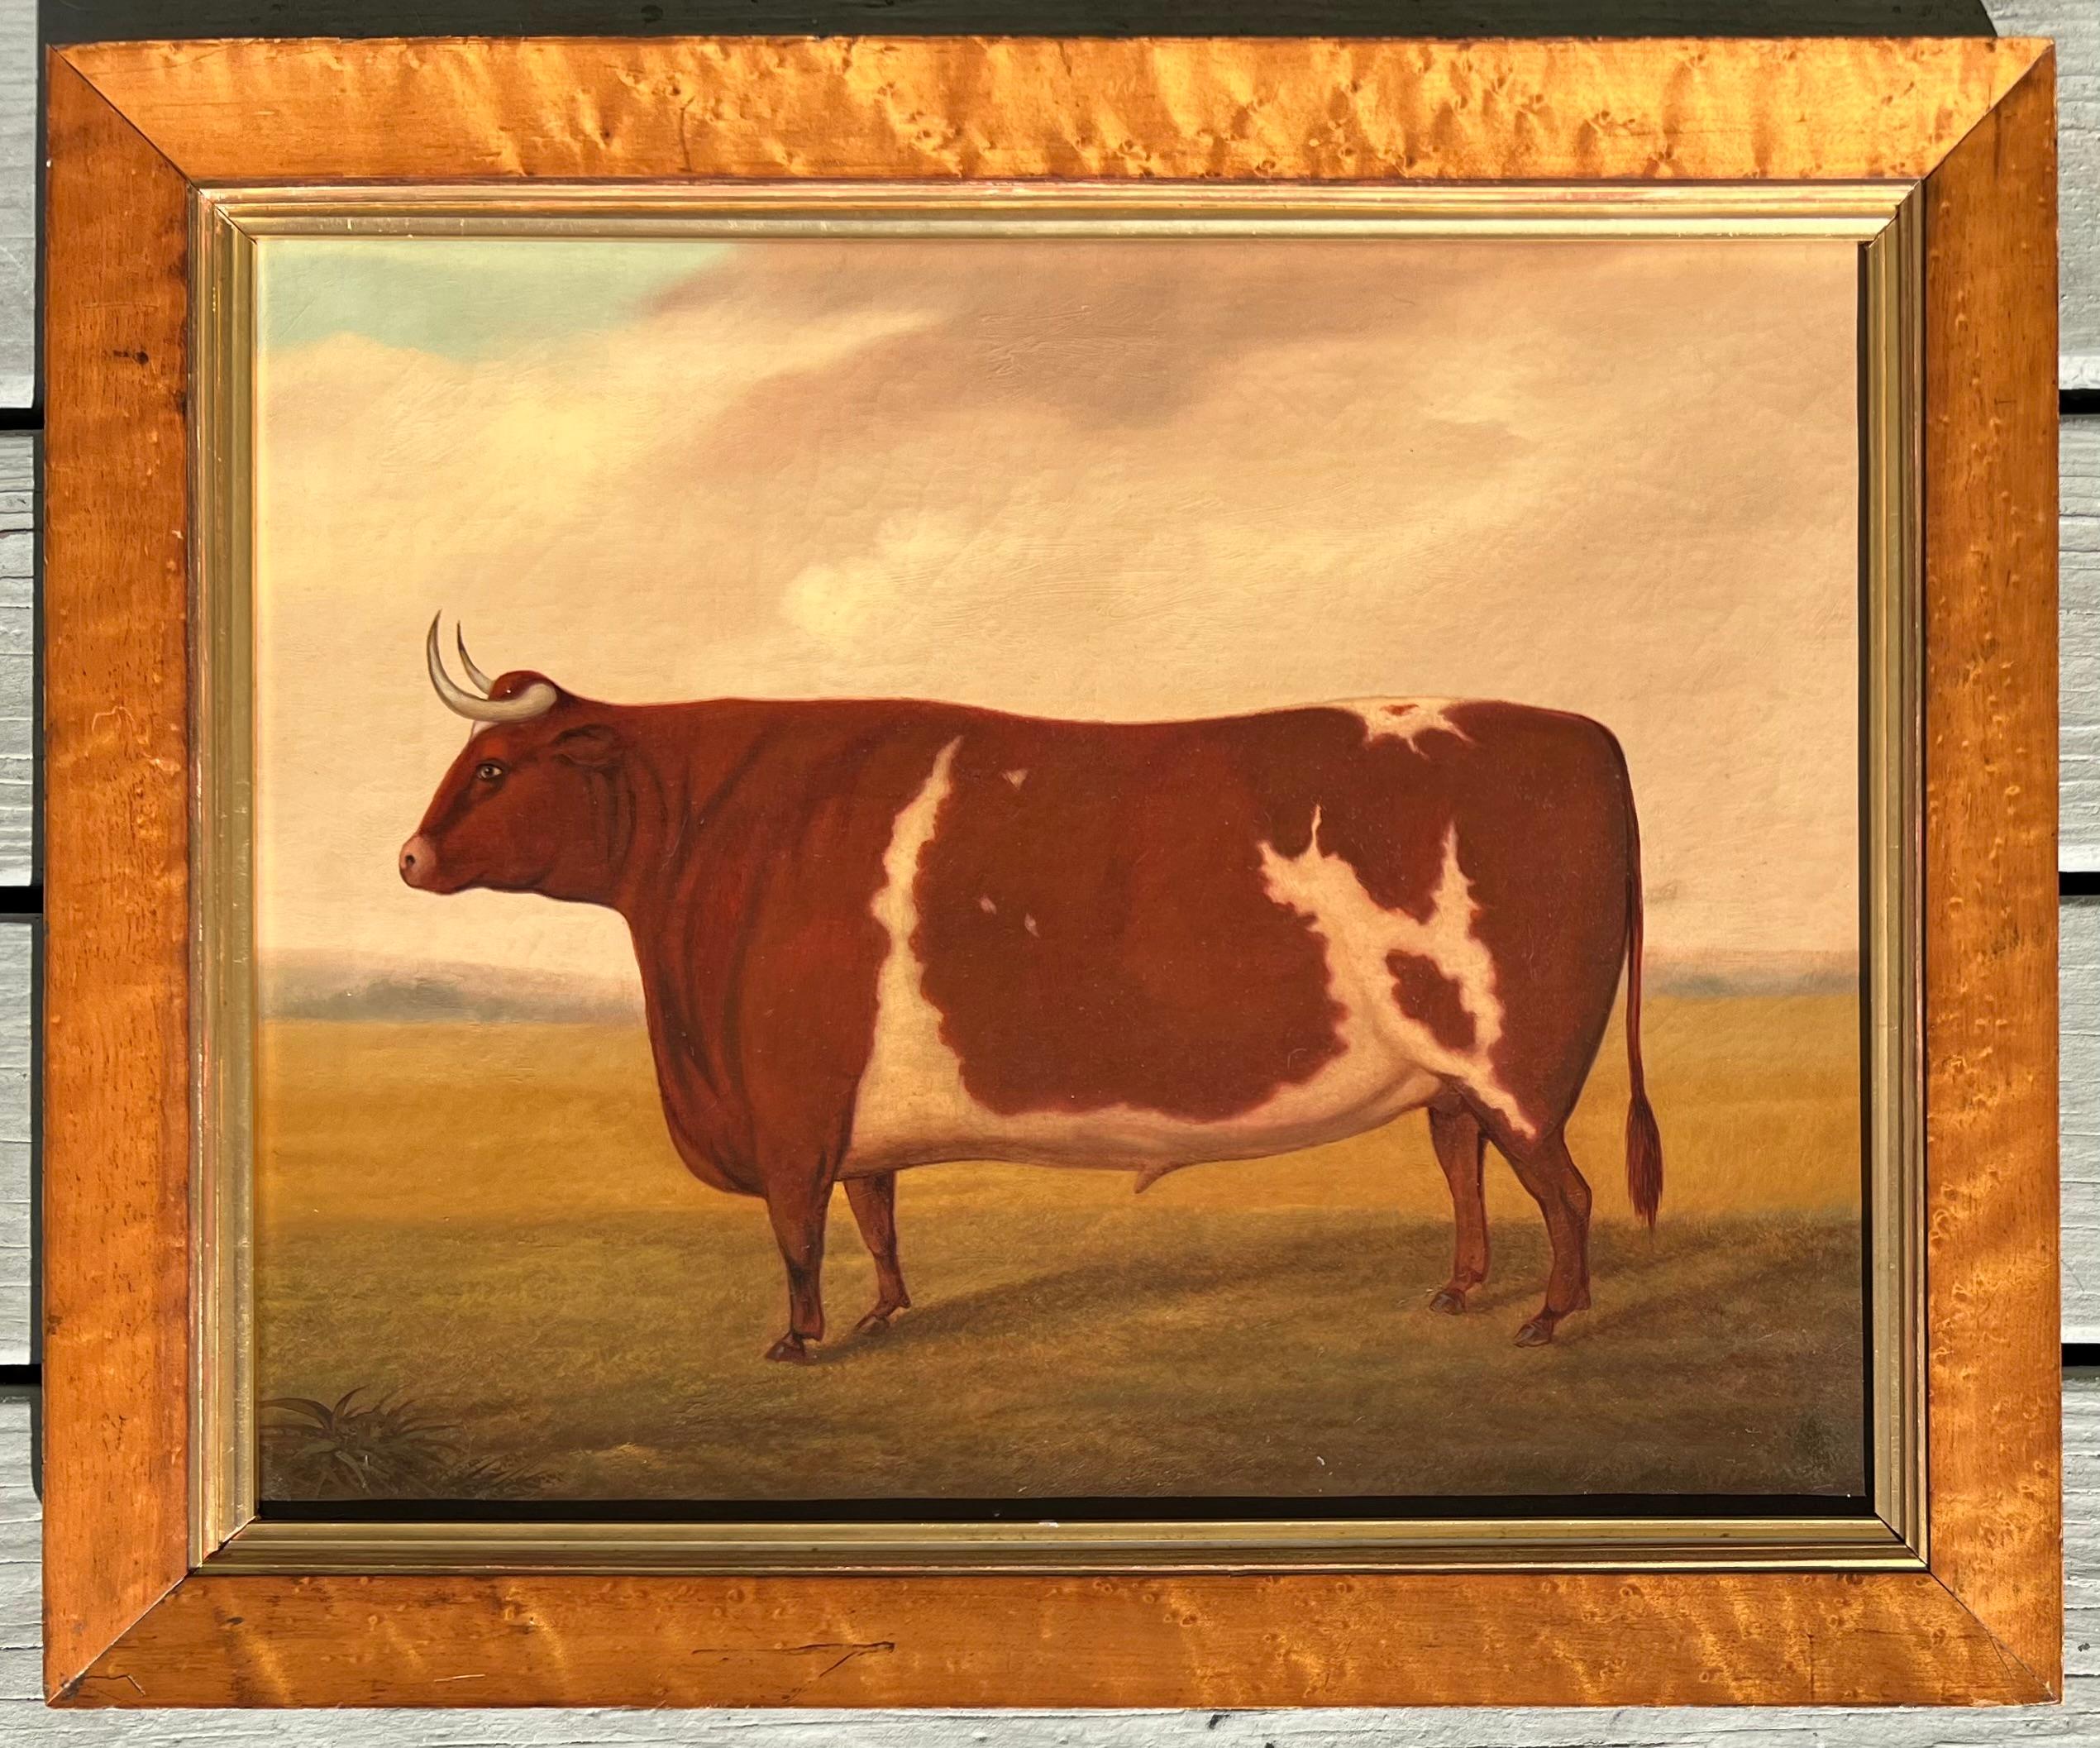 Oil on canvas, signed 'Joe Jonas' and dated 186(4)? on reverse. Presented in a maple frame and in excellent condition overall given its age. Presents very well and ready to hang. Either English or American School. Featuring a prize bull, possibly